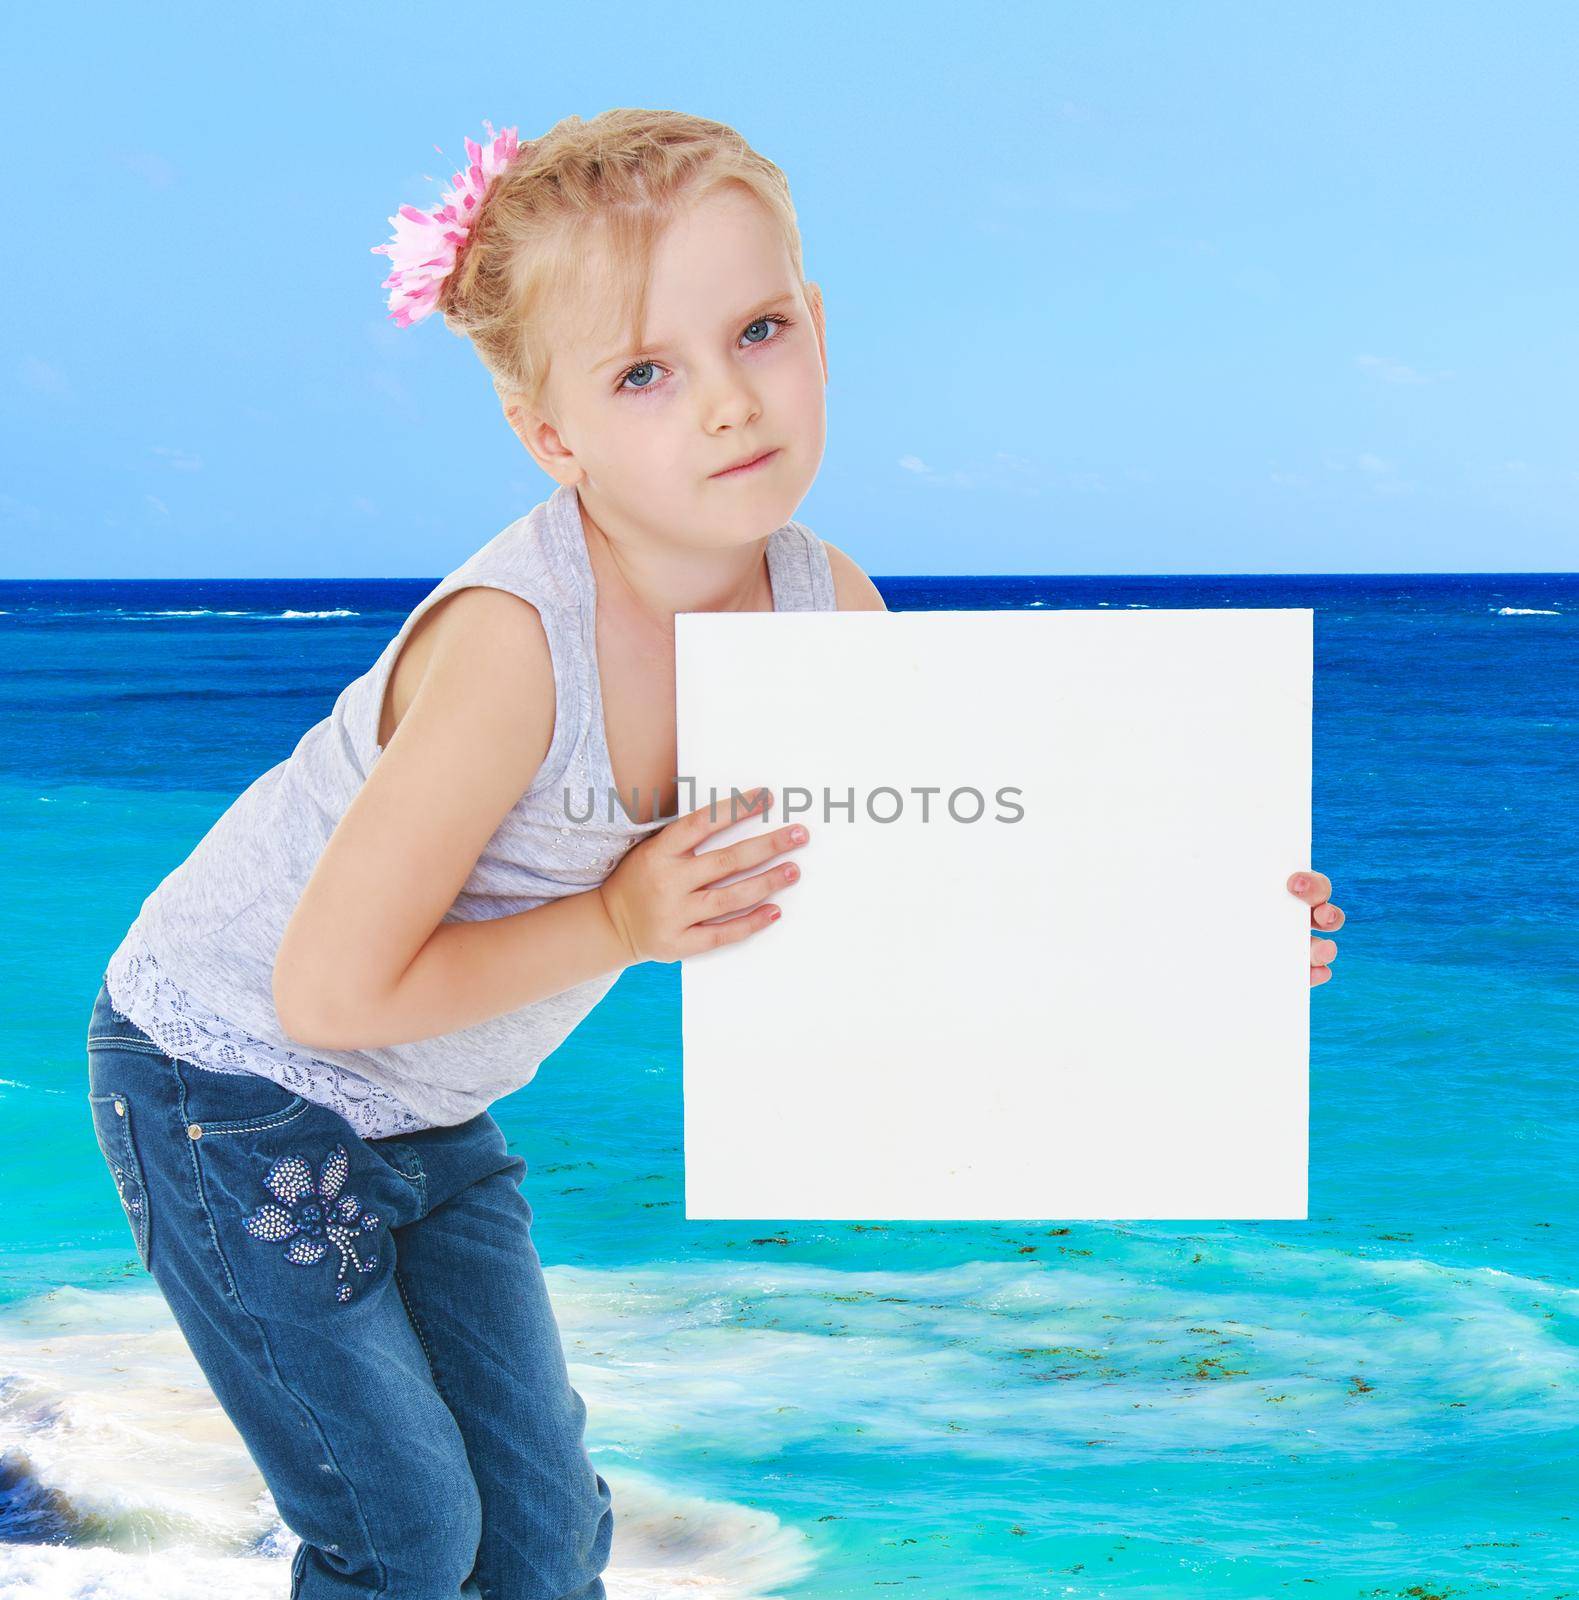 Girl in gray shirt holding a white banner on the background of the sea.